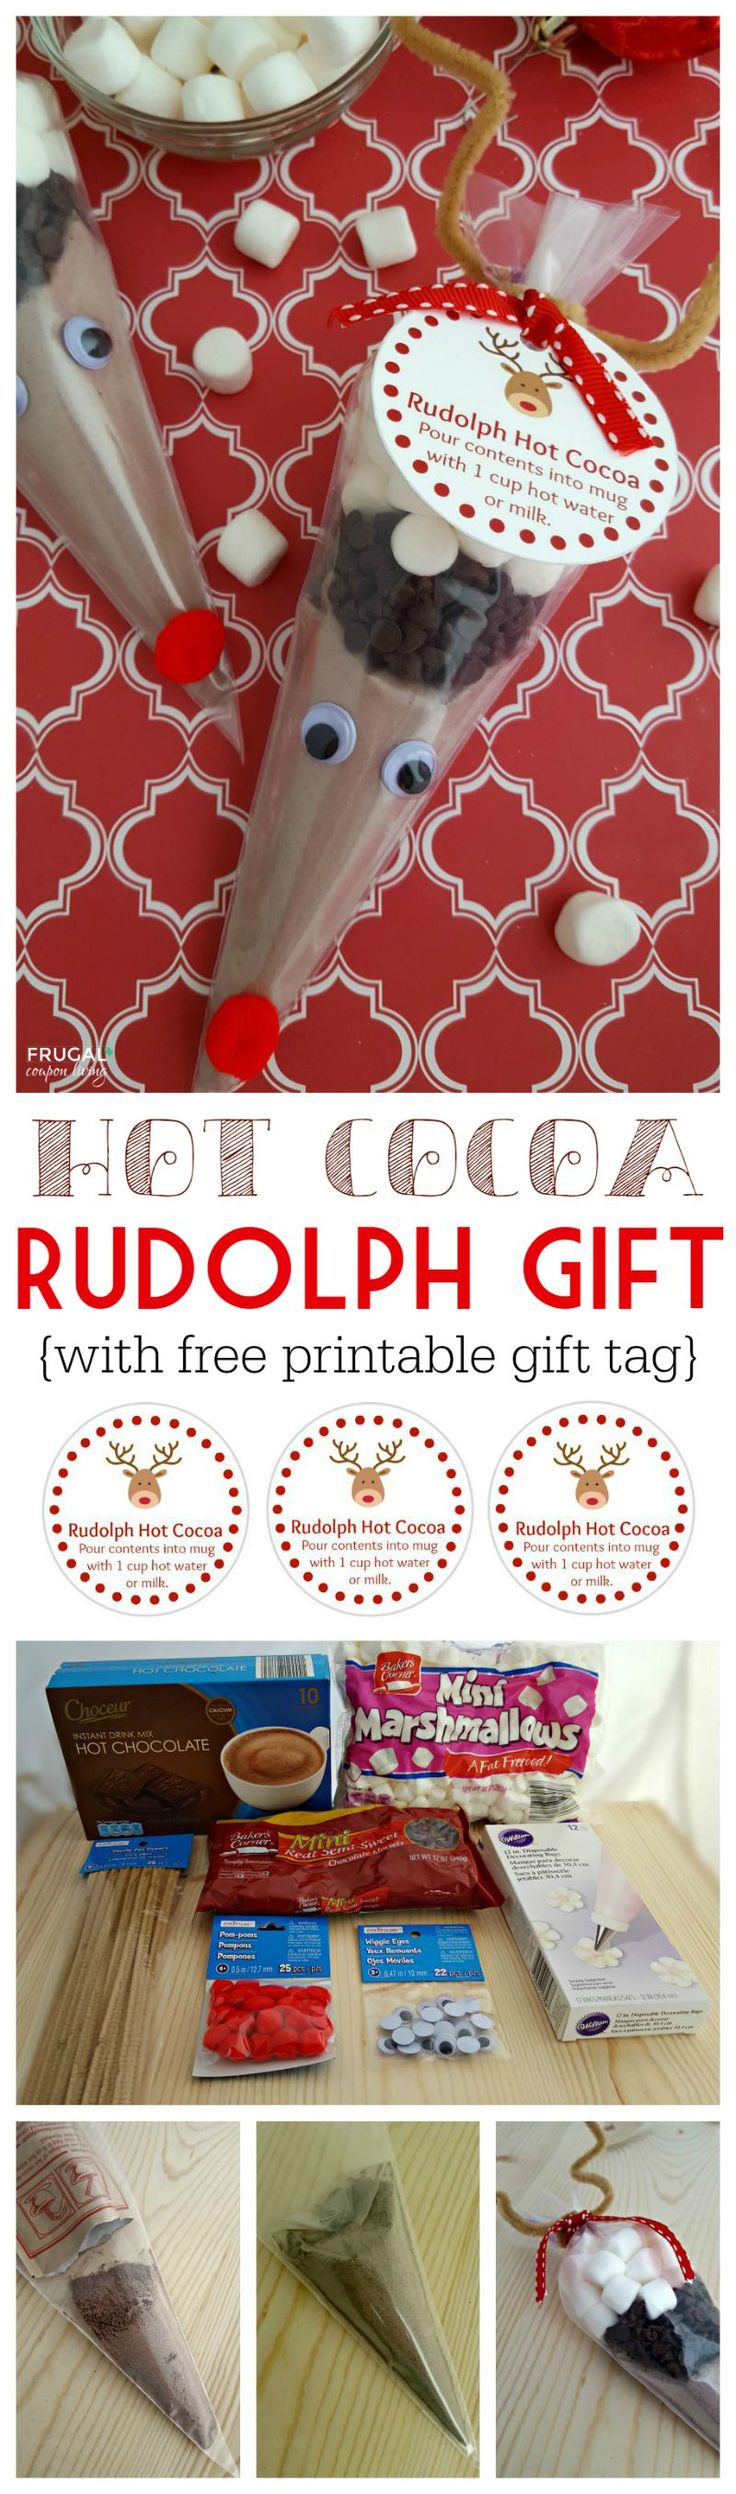 Hot Kids Gifts
 Rudolph Hot Cocoa FREE Printable Gift Tag Recipe